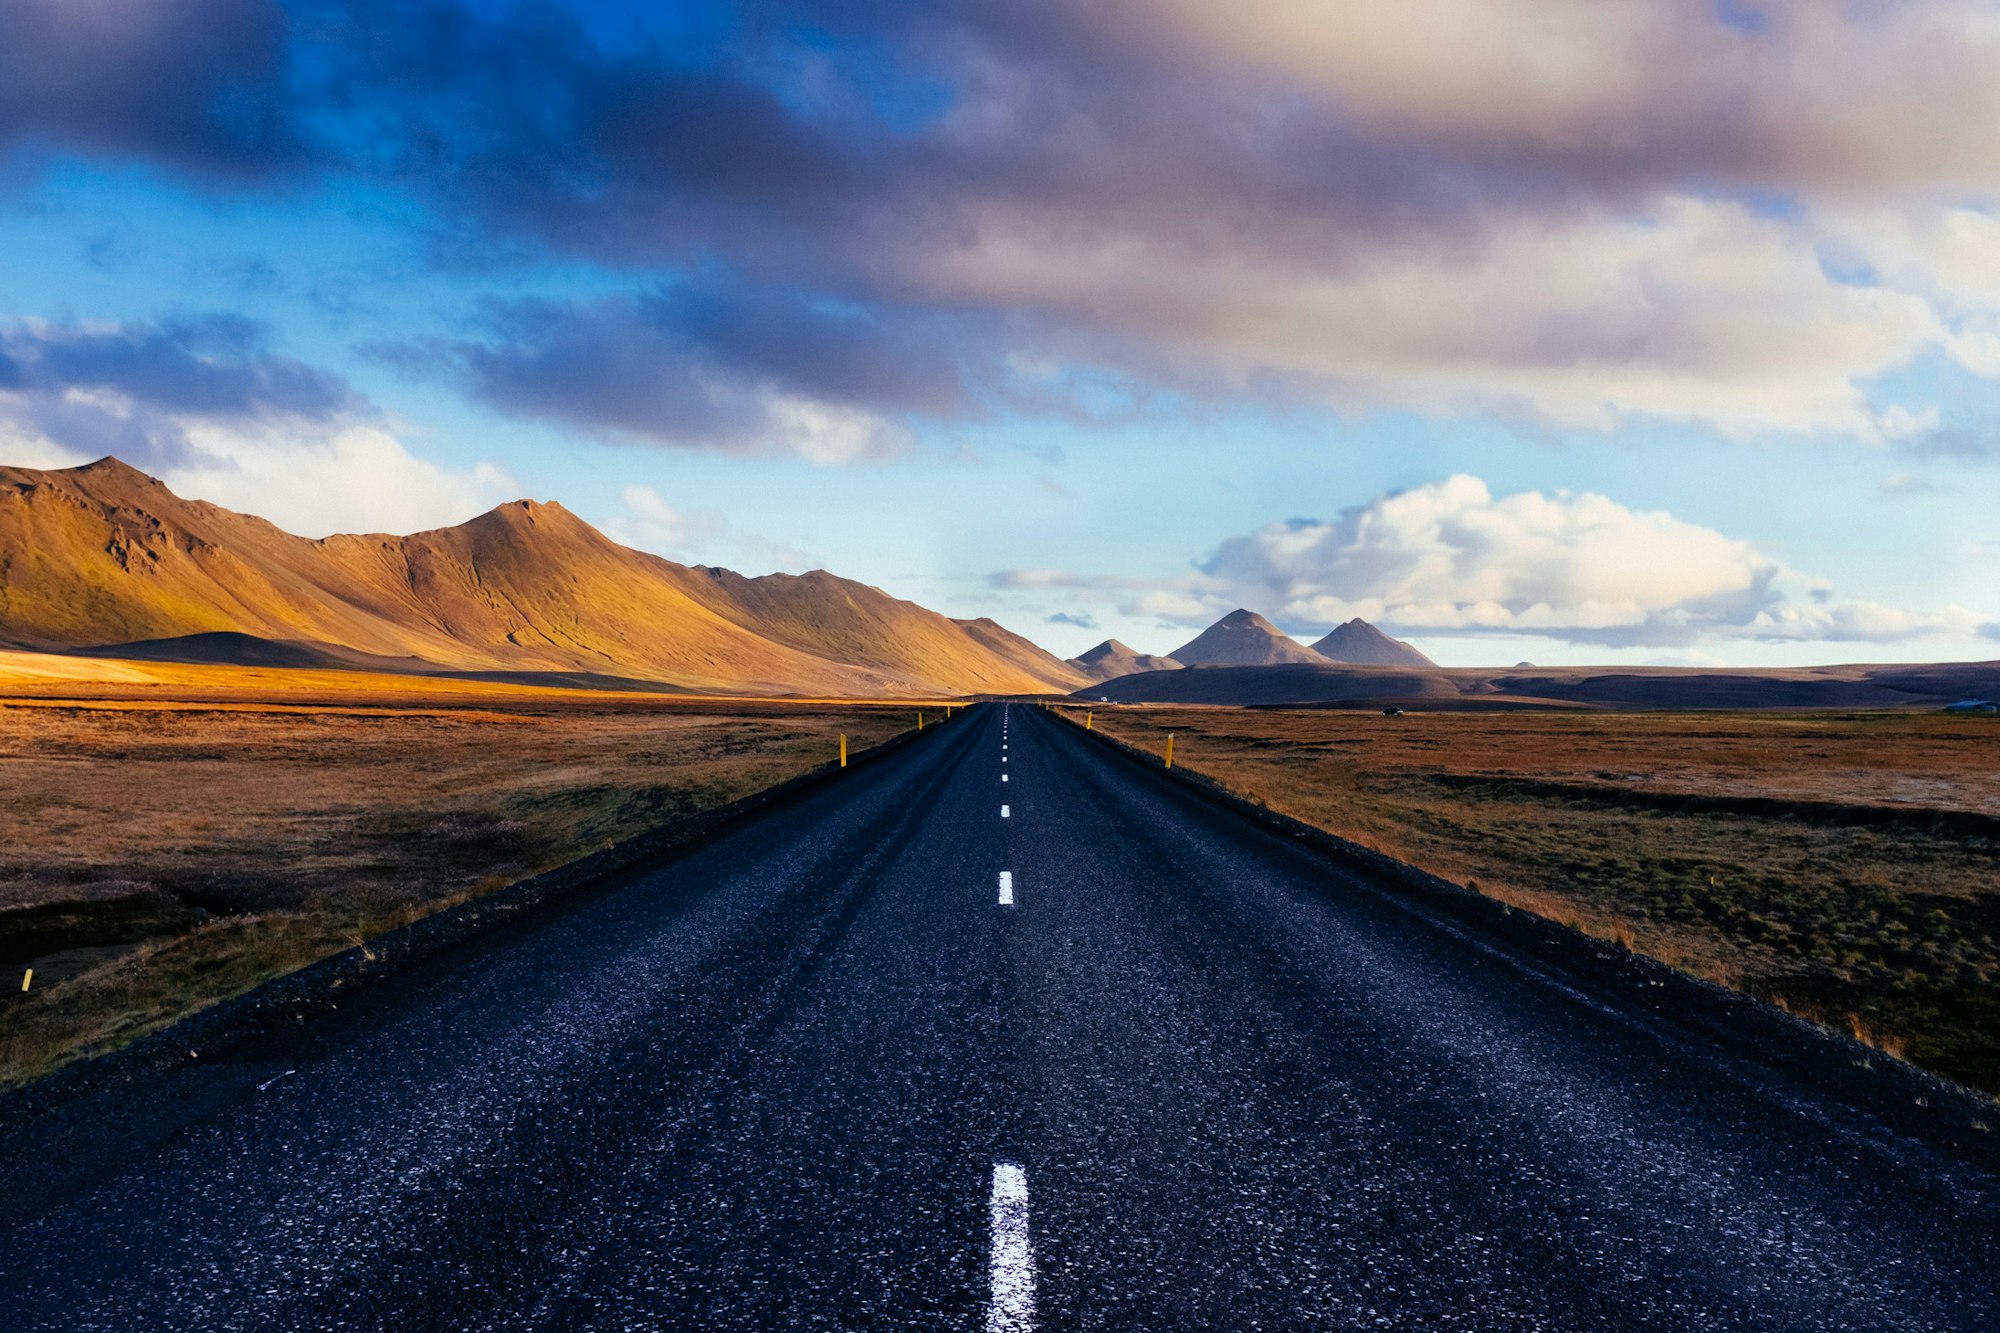 This photo was taken after me yelling at my friend to stop driving because I needed to take this picture, it was an amazing moment. It was taken in the Ring Road and it shows how beautiful Iceland can be even when you’re not in a point of interest.